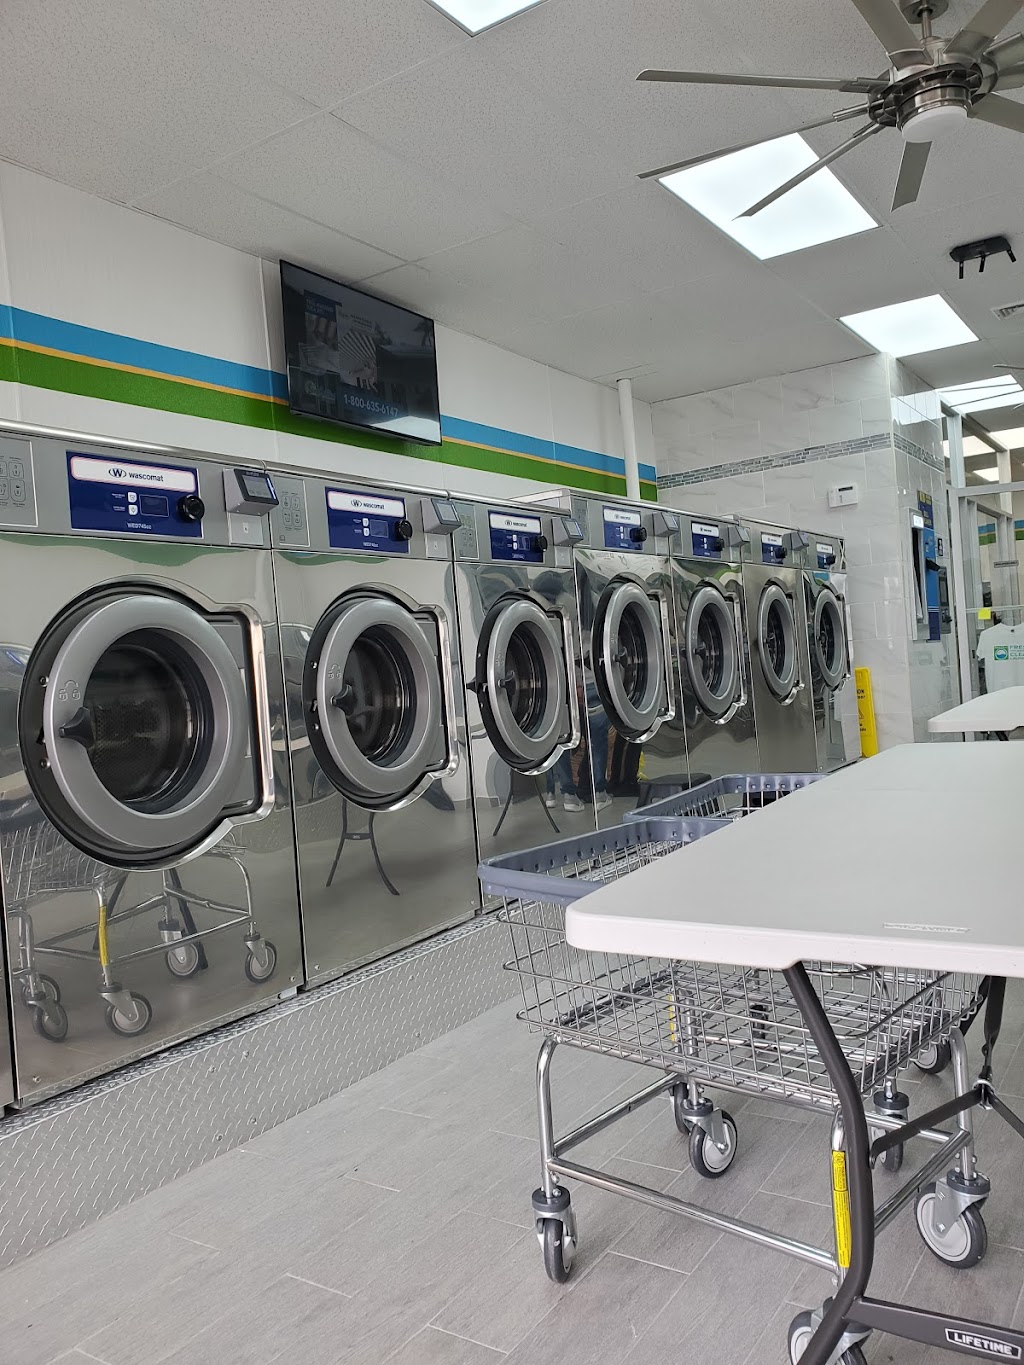 Fresh and Clean Laundry | 2012 N Jerusalem Rd, North Bellmore, NY 11710 | Phone: (516) 246-9340